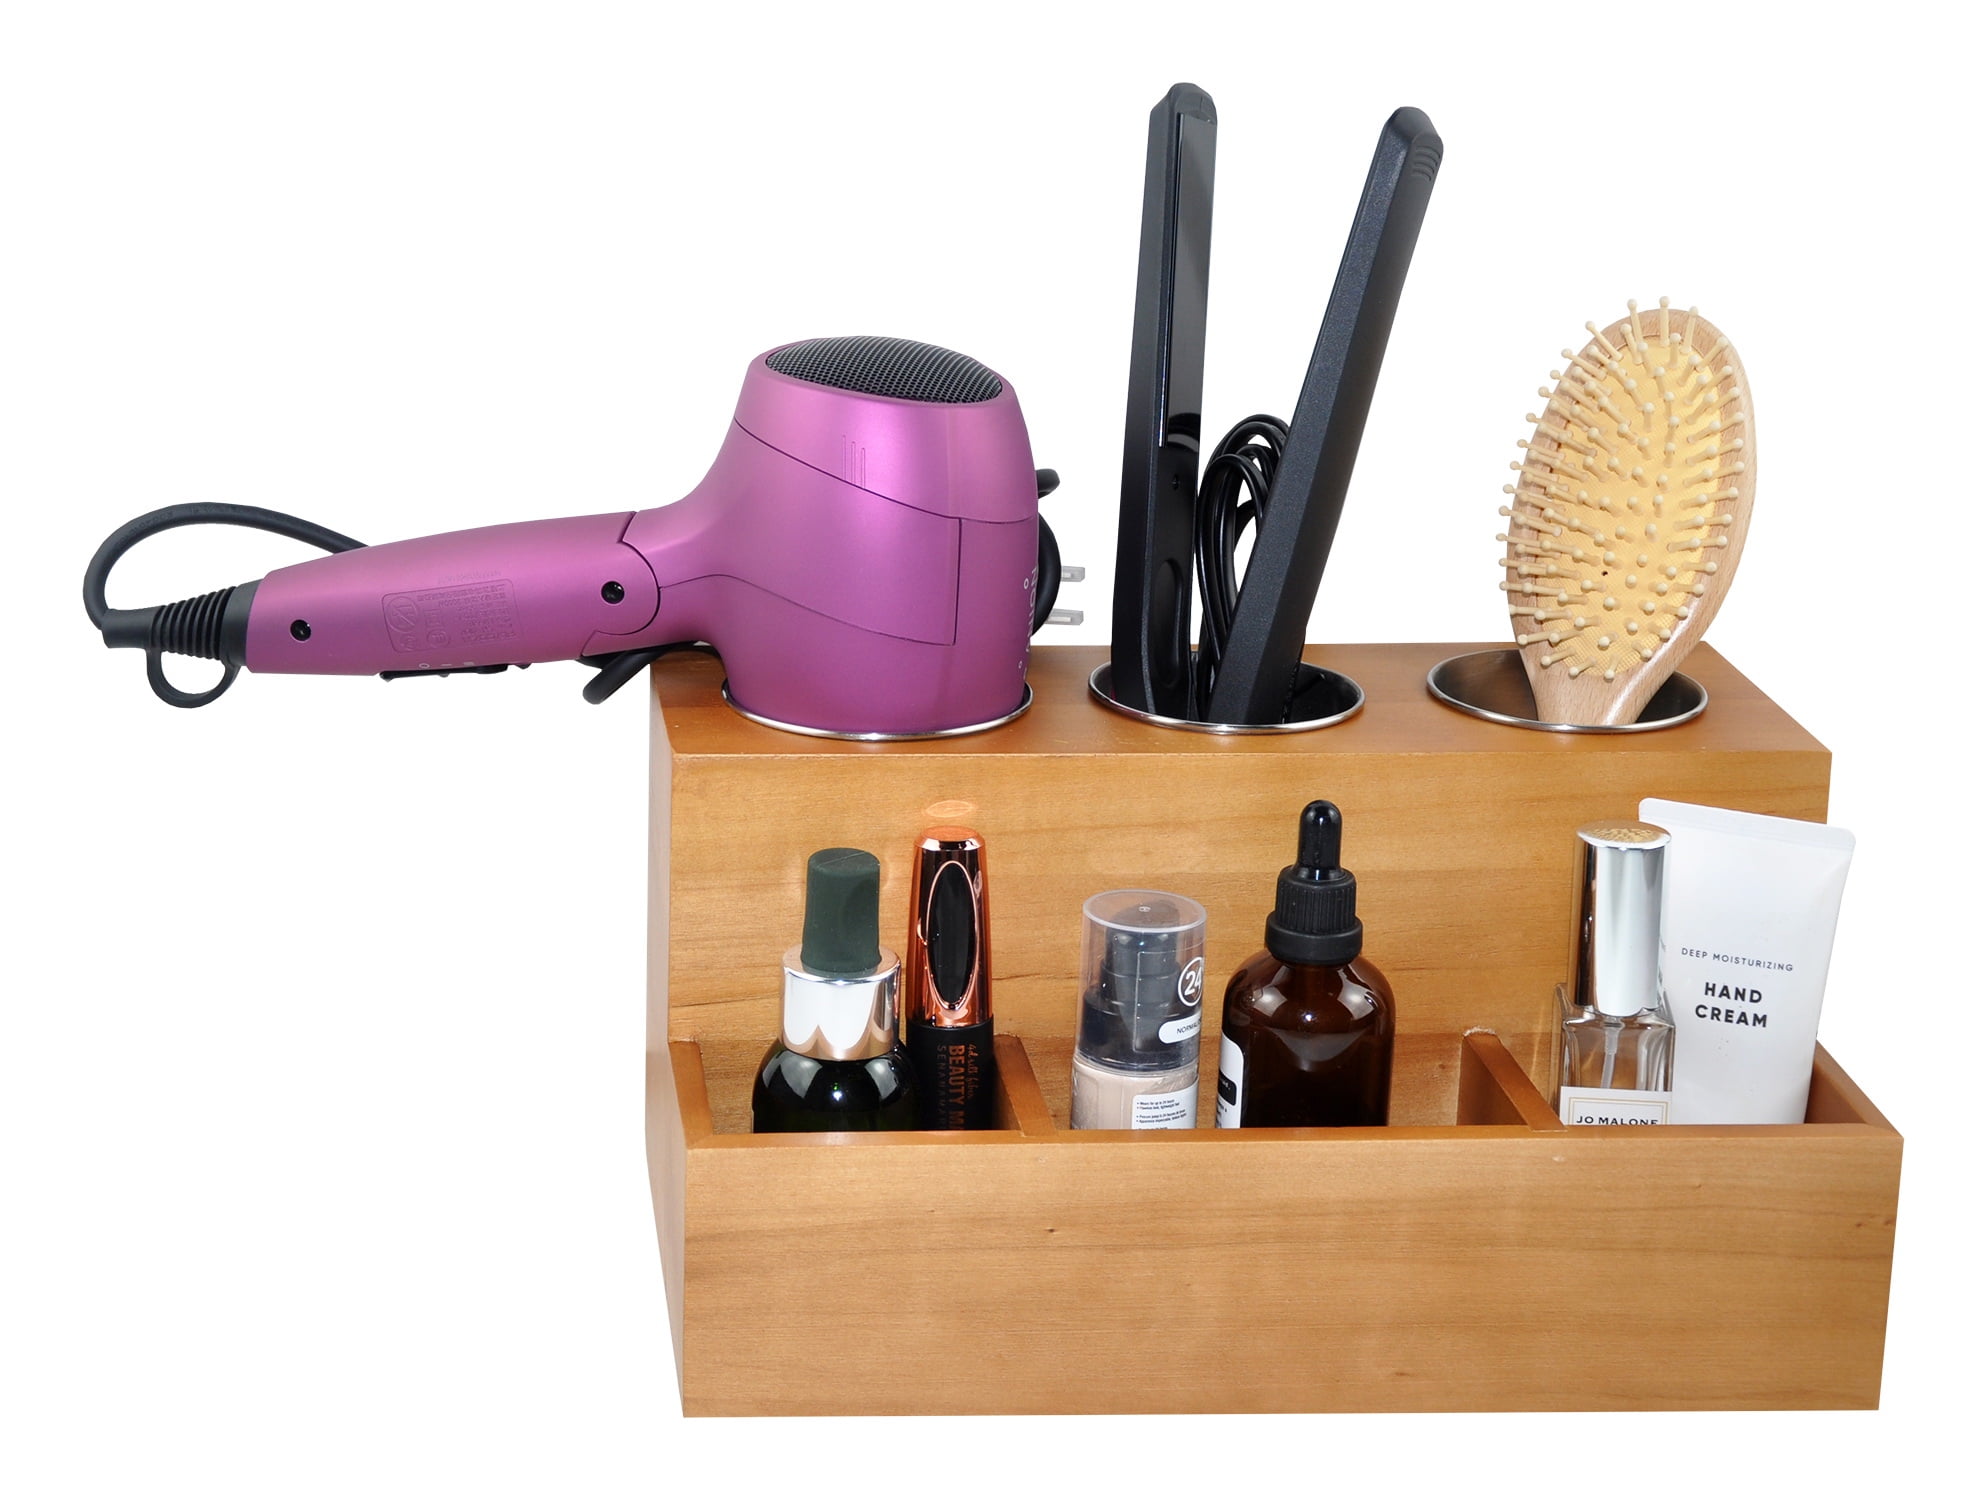 Hair Dryer & Tools Organizer - Flat Iron, Curling Wand, Brushes Holder -  Caddy Storage for Makeup Counter - Tan 